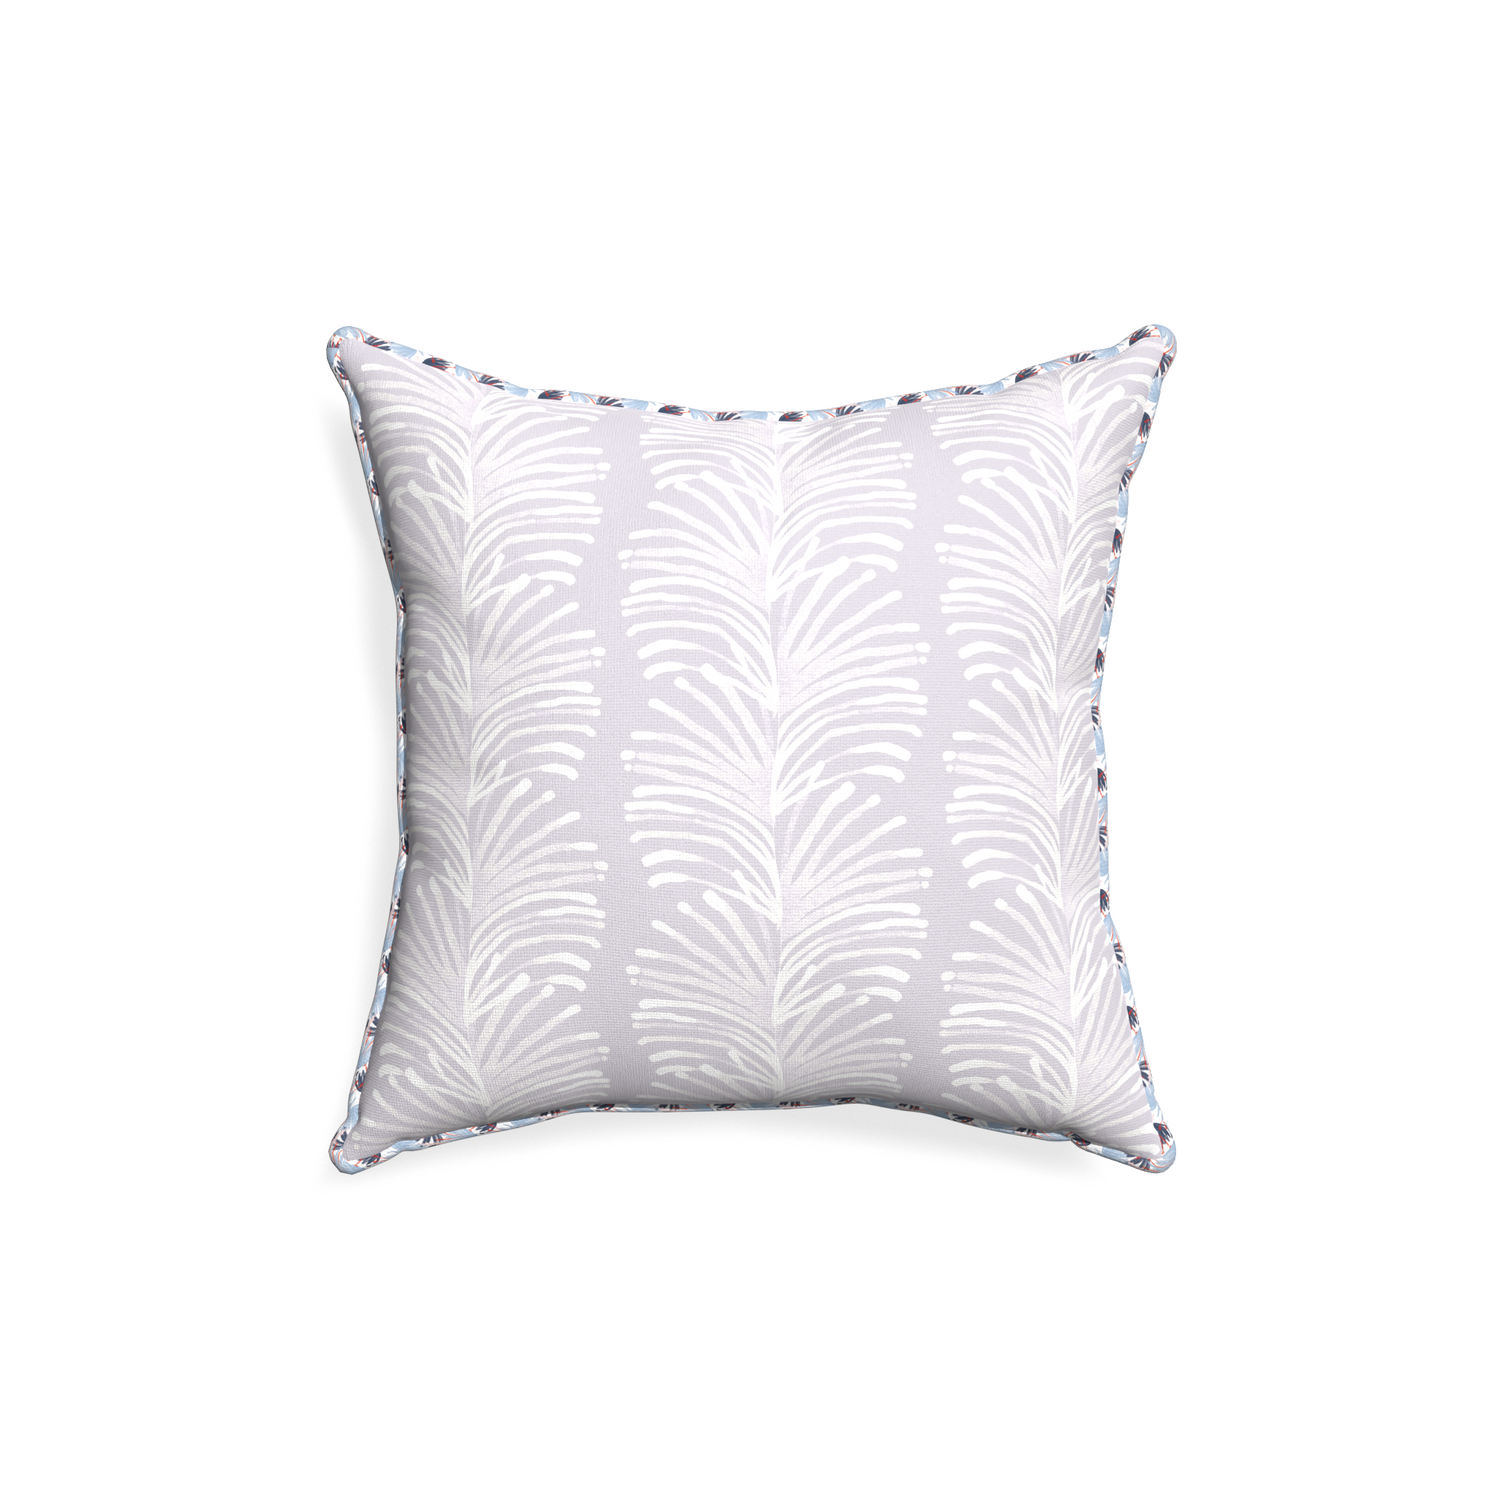 18-square emma lavender custom pillow with e piping on white background